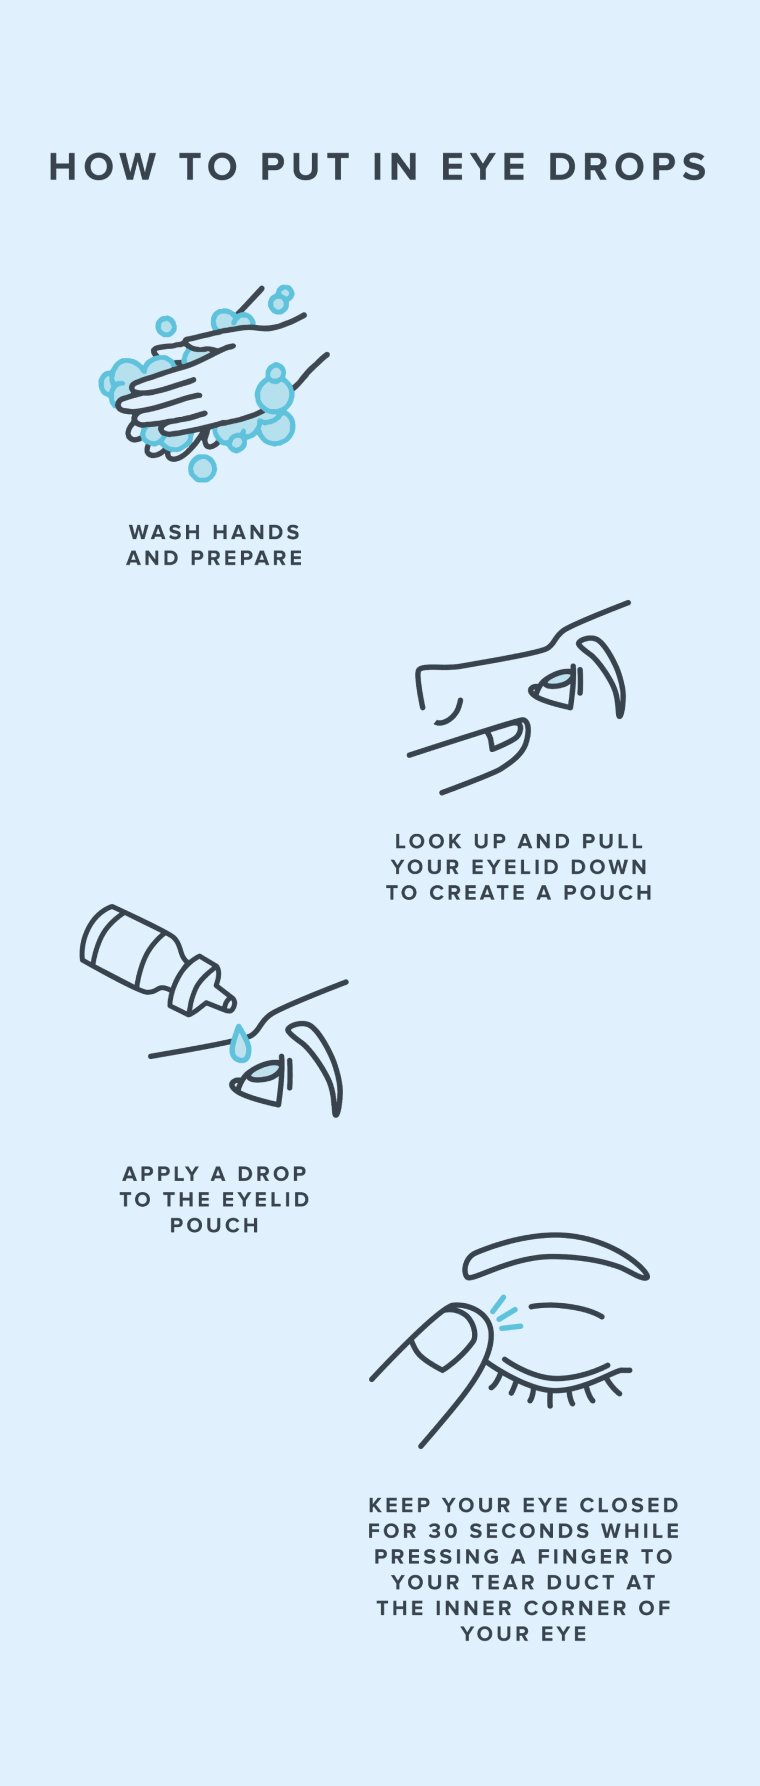 Infographic illustrating how to put in eye drops